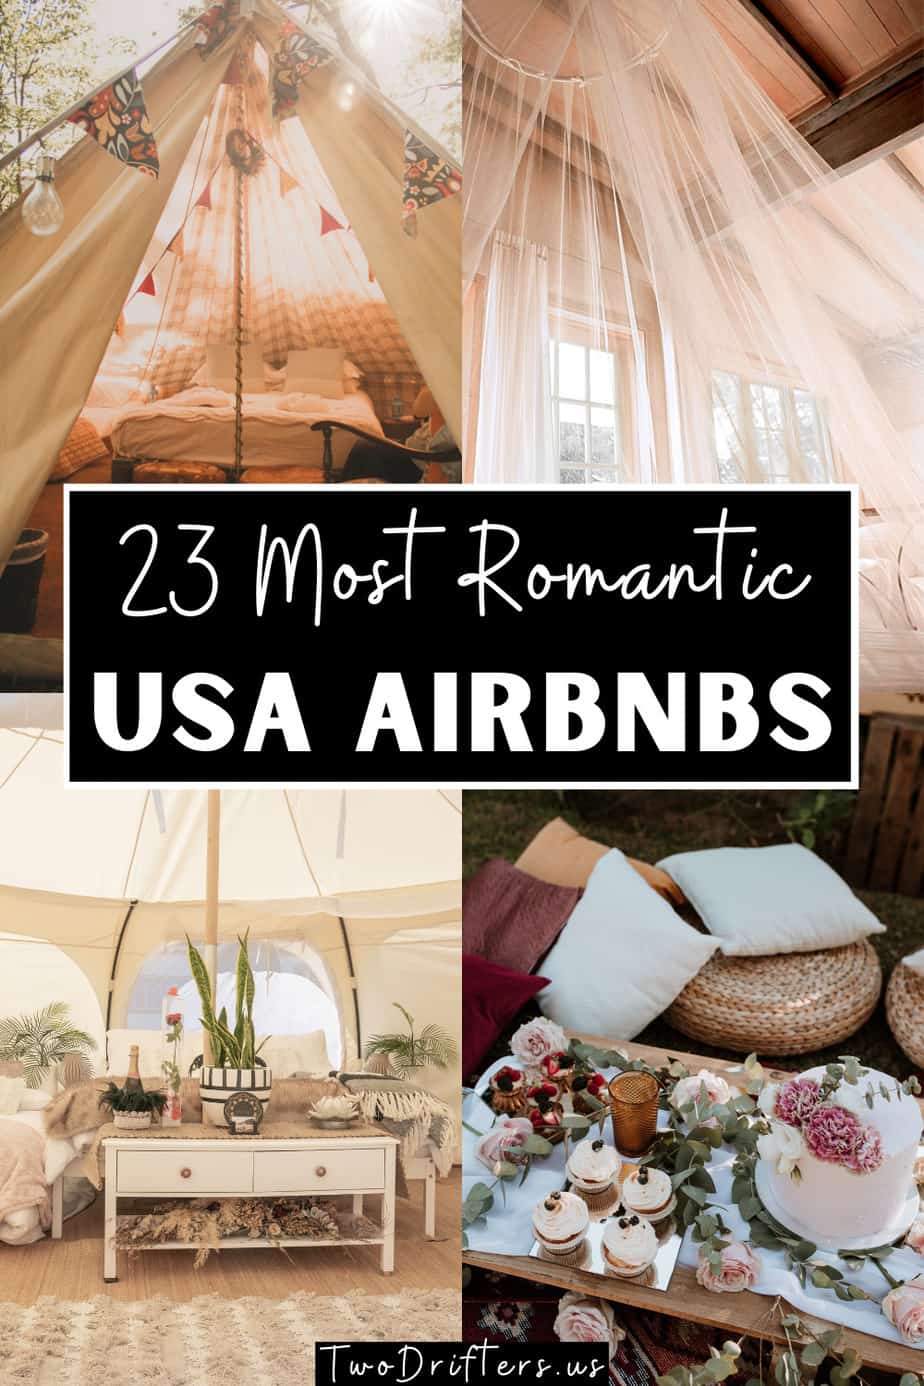 Pinterest social share image that says "23 Most Romantic USA Airbnbs."